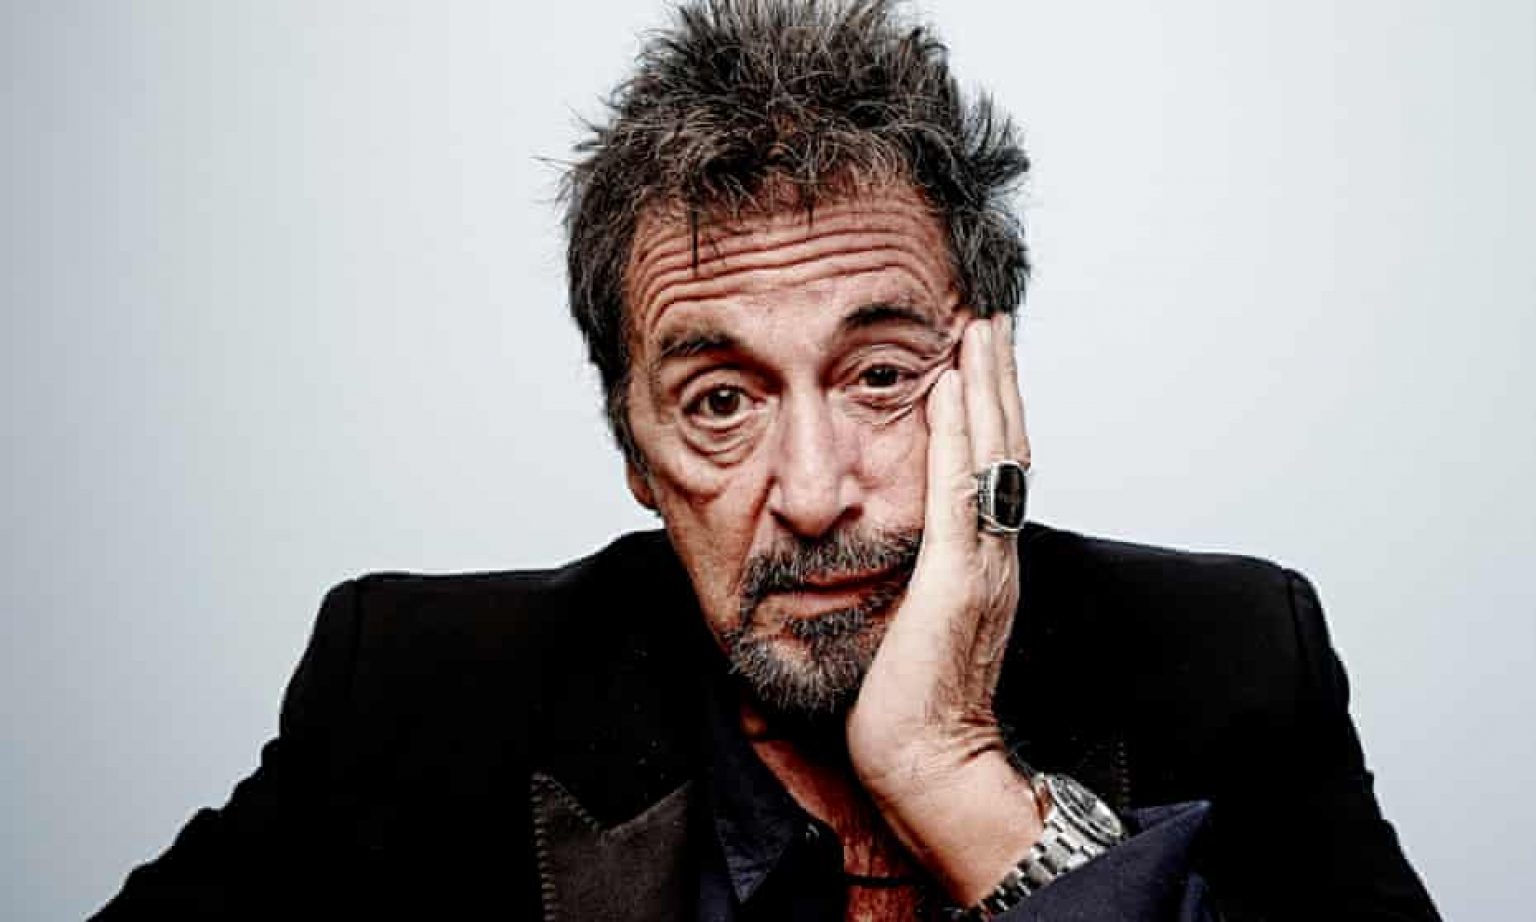 Al Pacino Biography Age, height, Girlfriends, Family, Movies, TV Shows